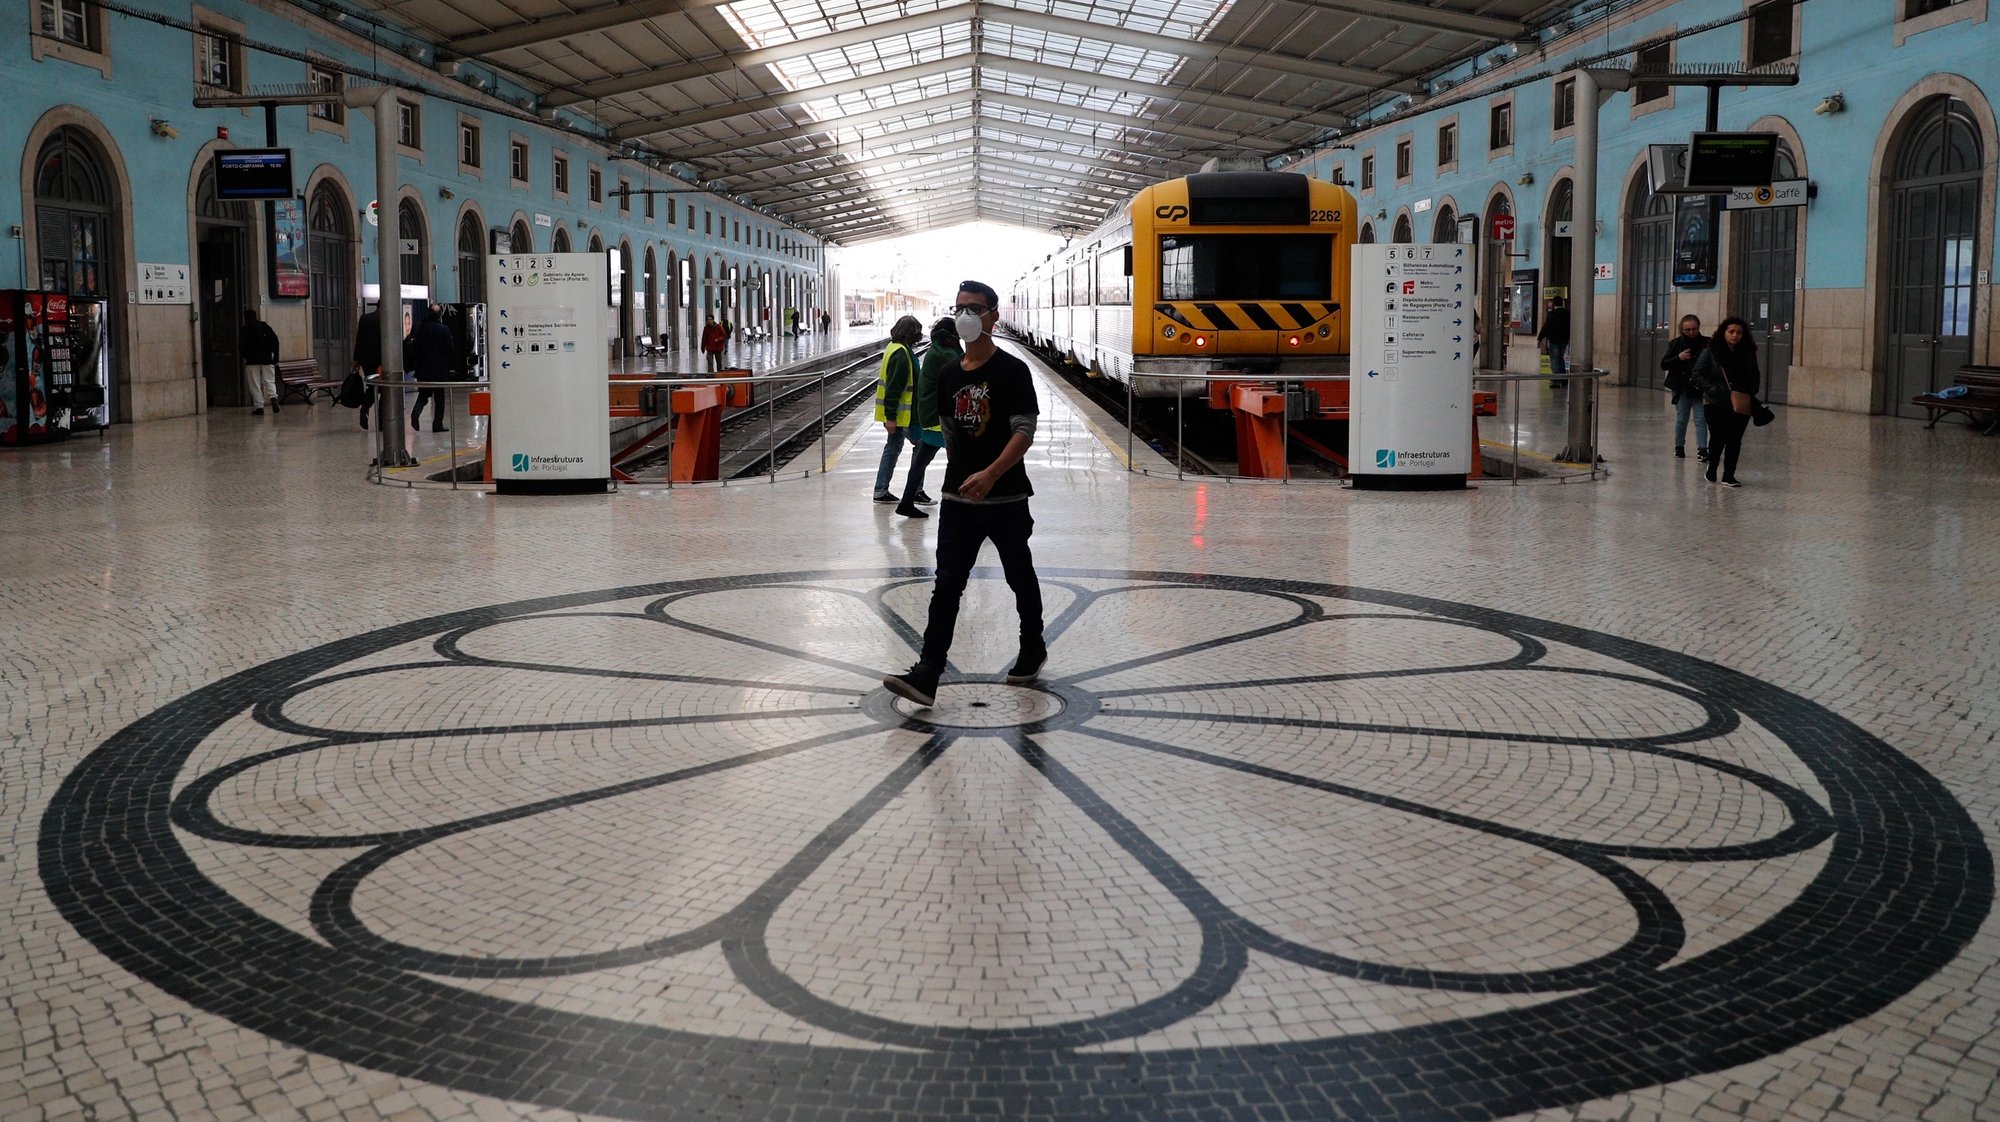 epa08297612 A man wears a protective mask at Santa Apolonia railway station in Lisbon, Portugal, 16 March 2020. In Portugal, the Directorate General of Health (DGS) on 15 March, confirmed that the nation had 245 cases of COVID-19 infections.  EPA/ANTONIO COTRIM